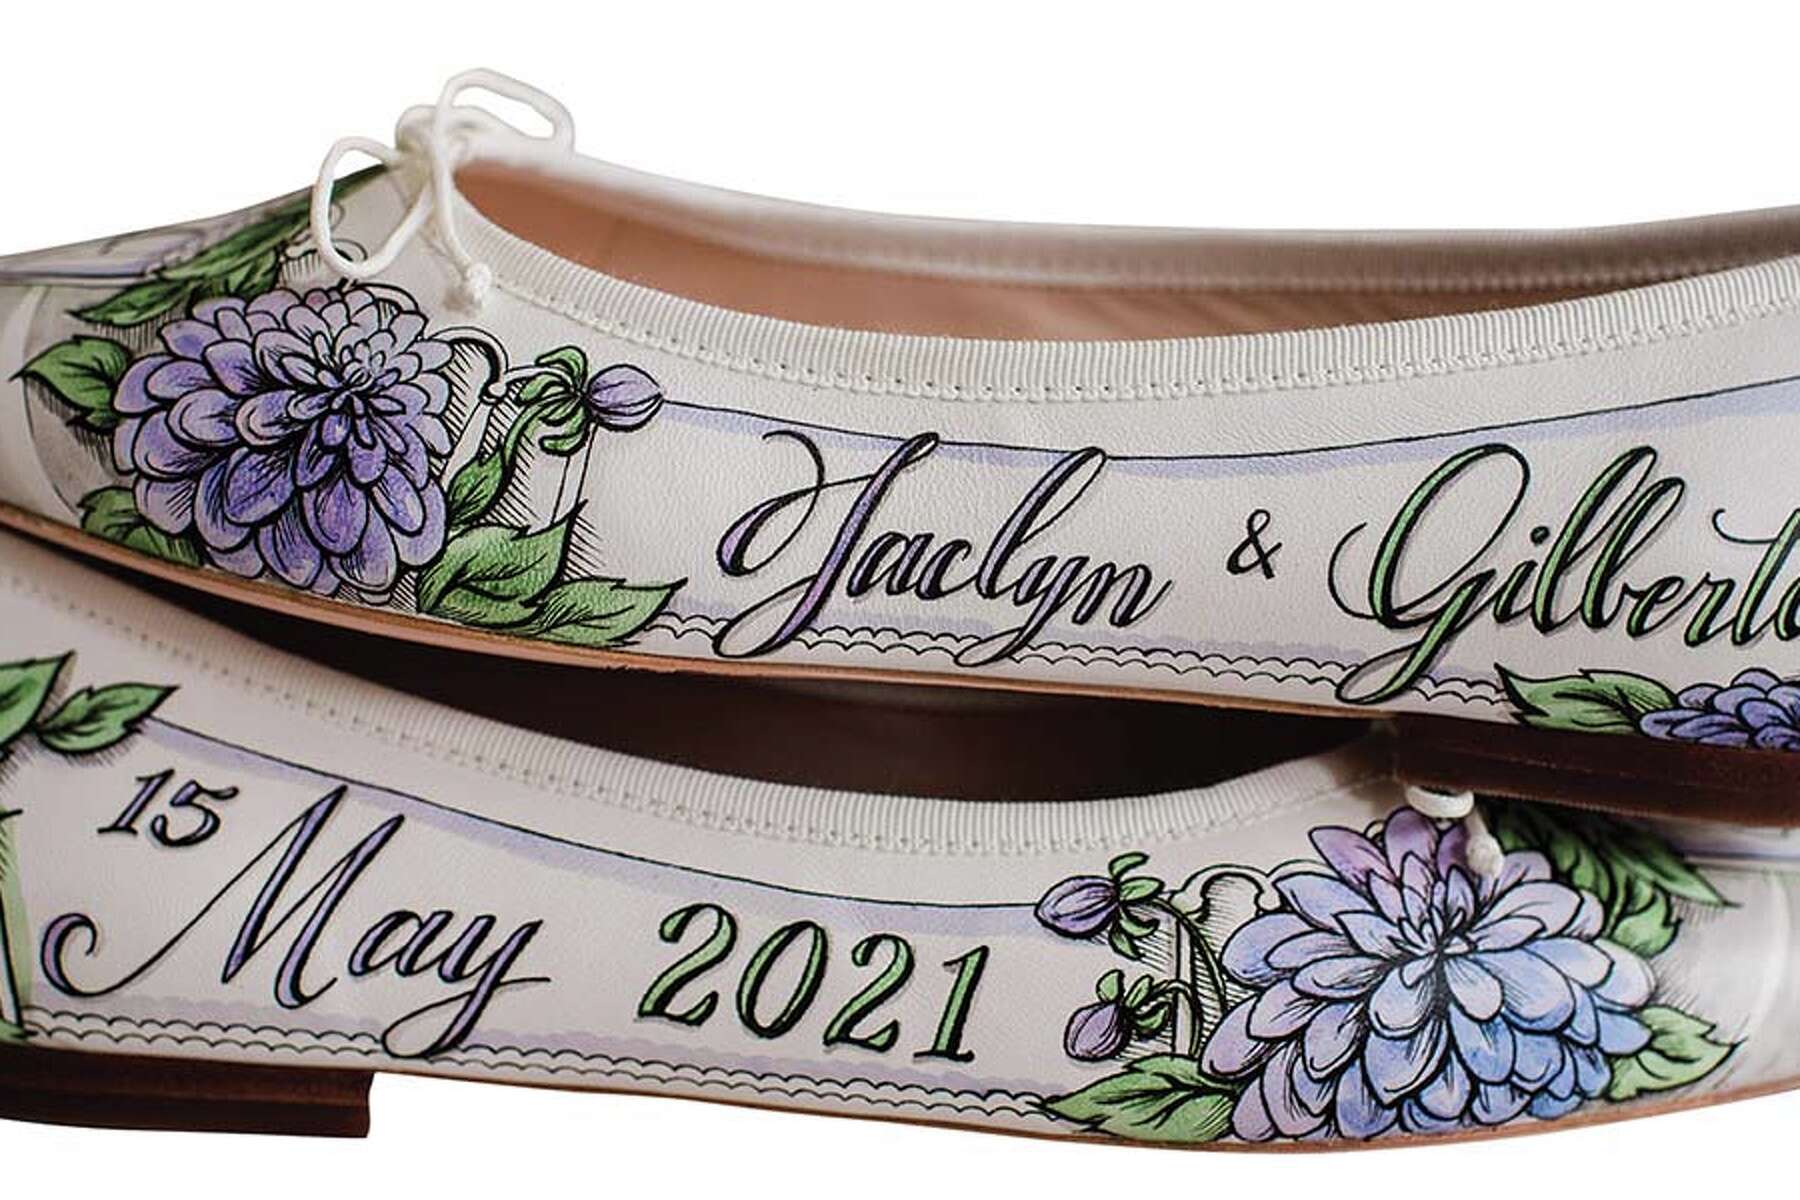 Customise Your Colour Add on for orders only Add Colour to the Soles of Your Wedding Shoes